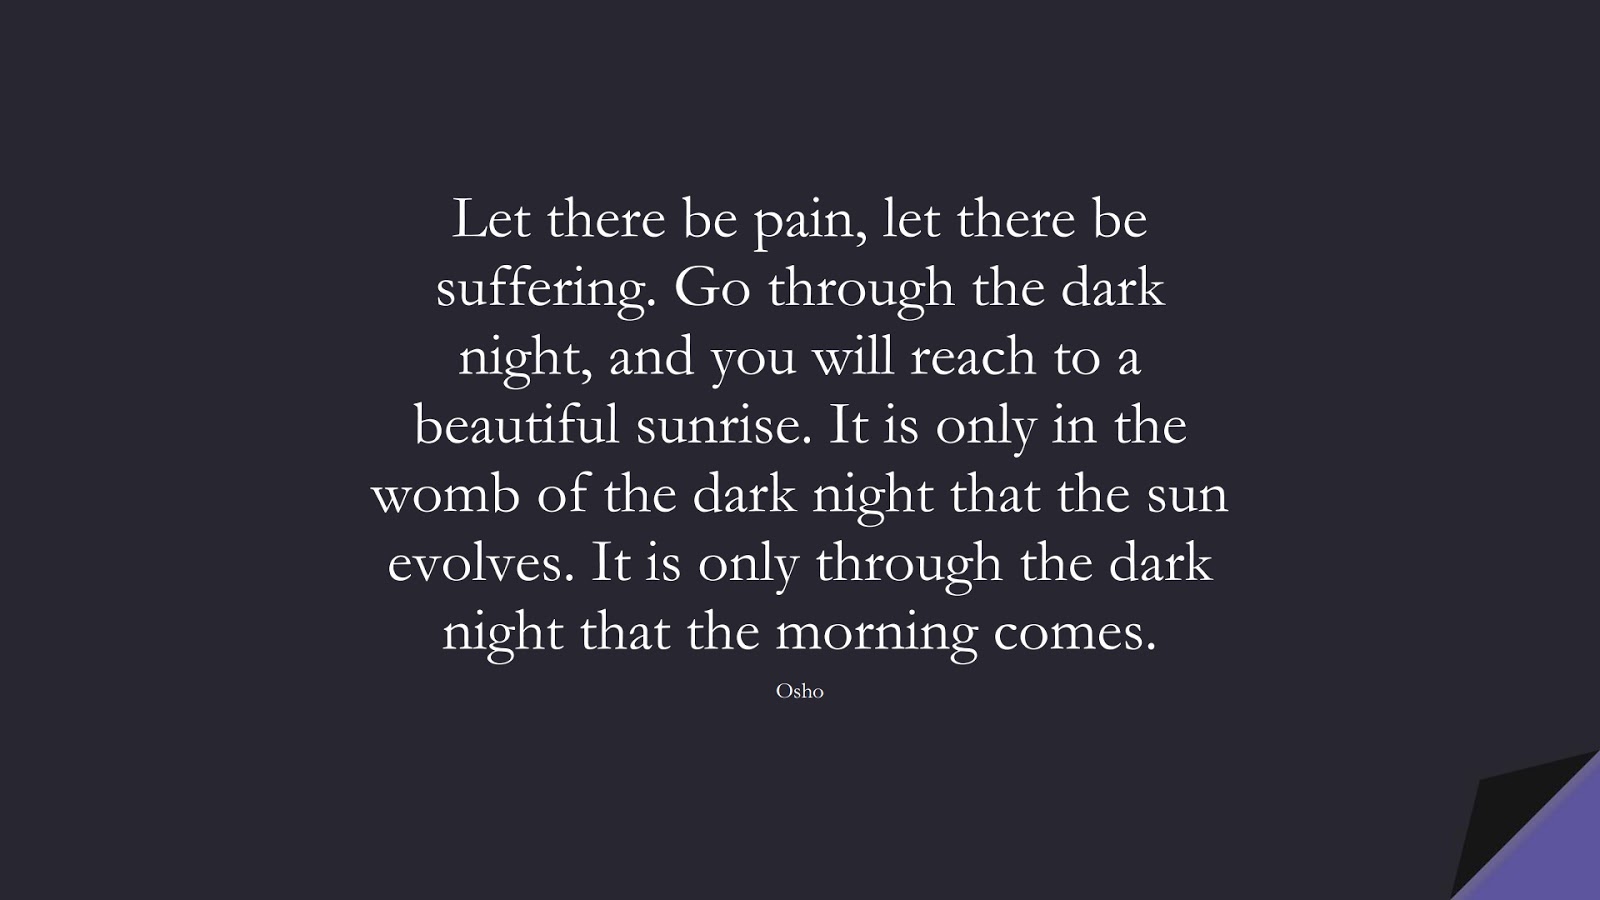 Let there be pain, let there be suffering. Go through the dark night, and you will reach to a beautiful sunrise. It is only in the womb of the dark night that the sun evolves. It is only through the dark night that the morning comes. (Osho);  #DepressionQuotes